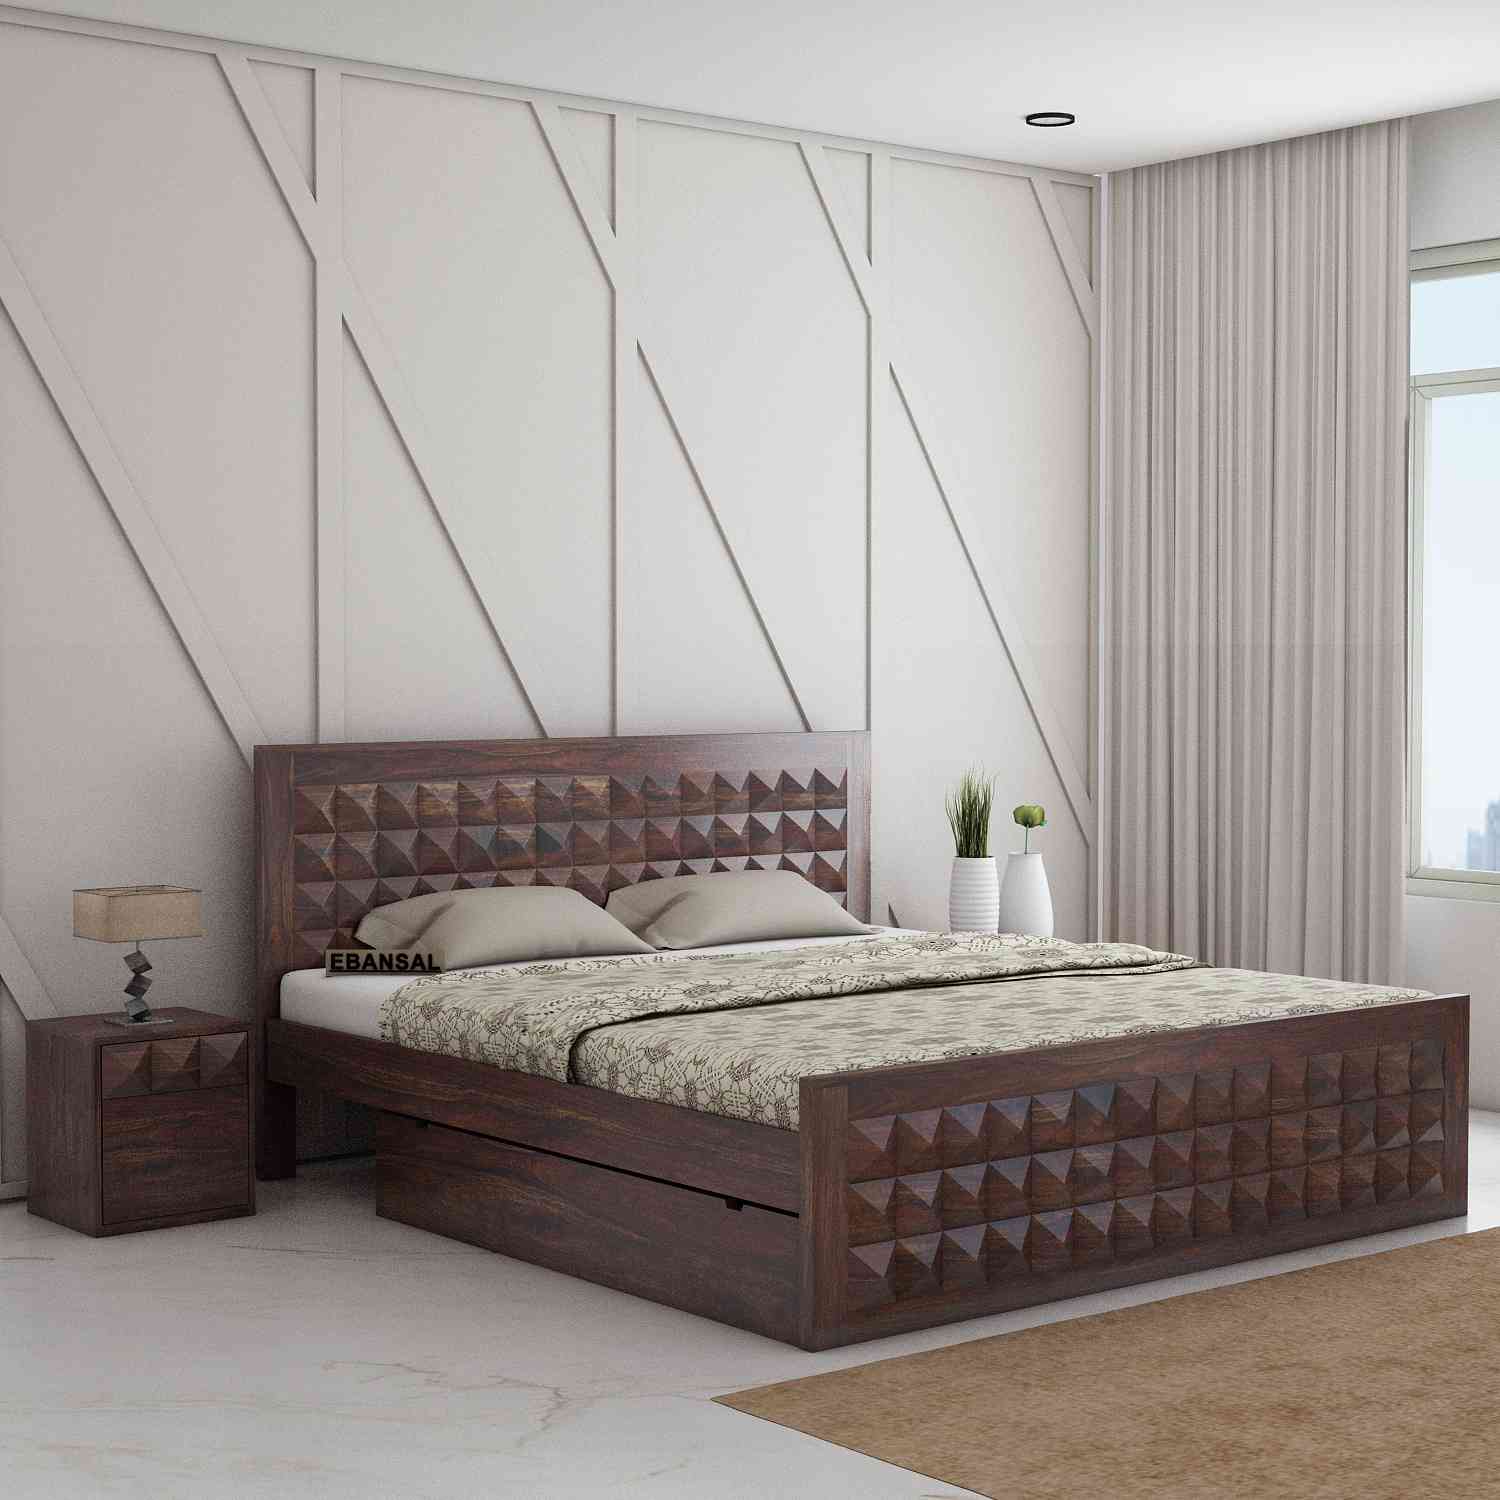 Sofia Solid Sheesham Wood Bed With Two Drawers (Queen Size, Walnut Finish)